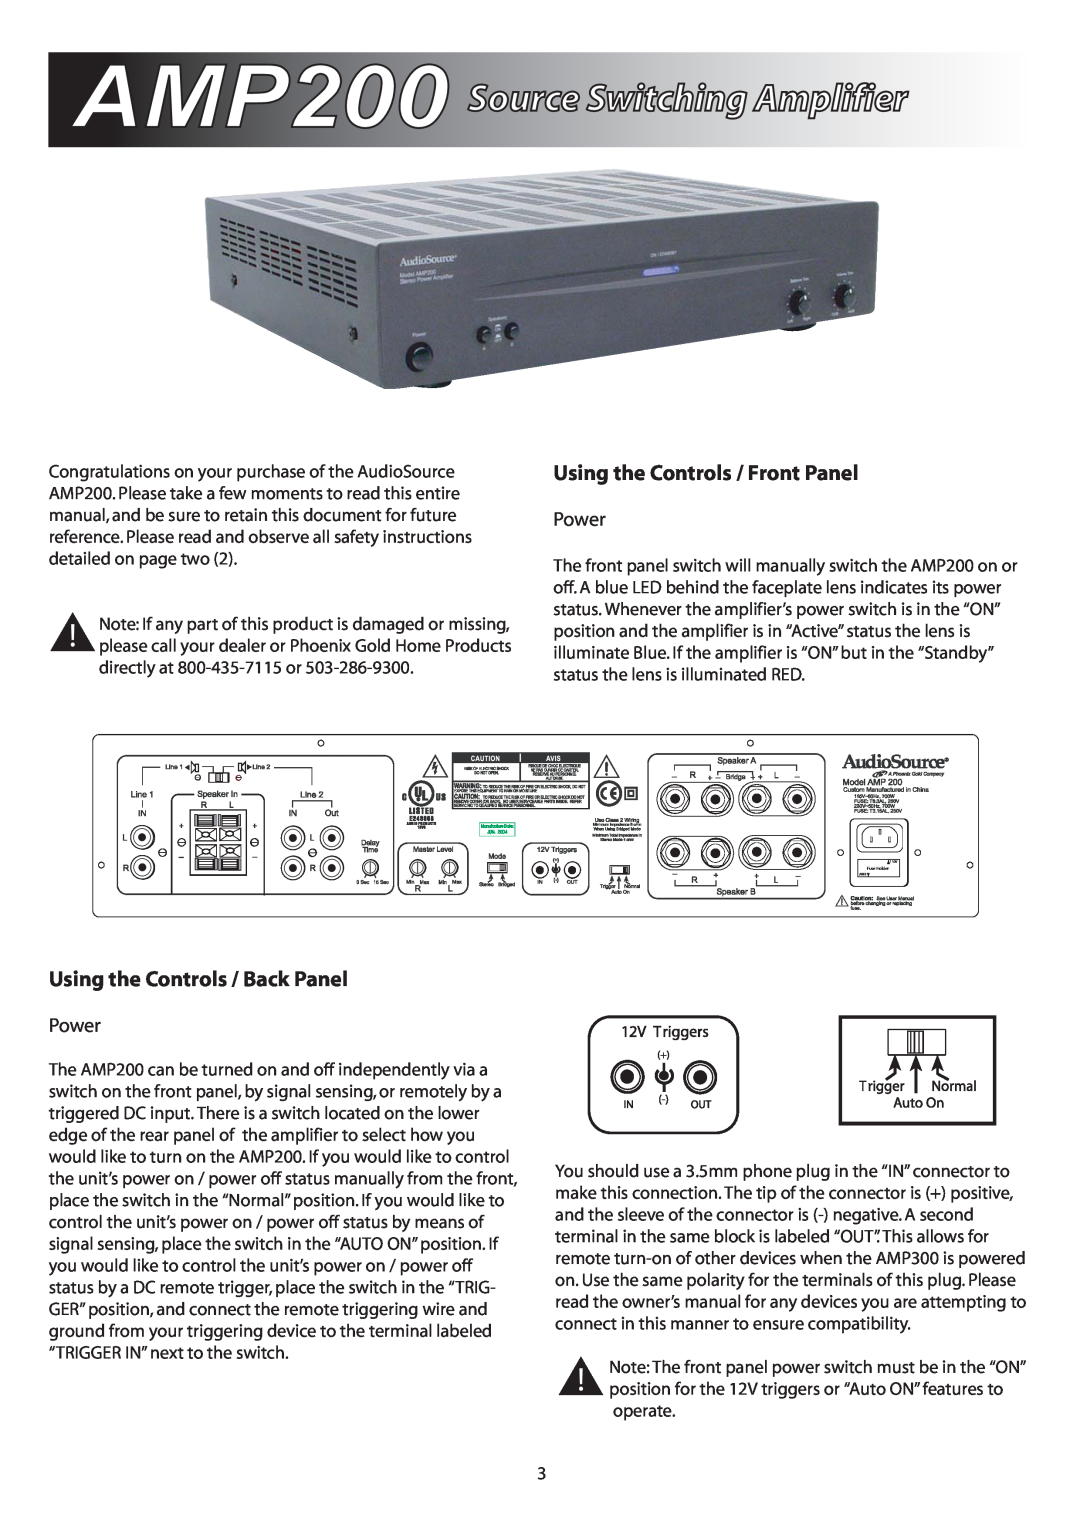 AudioSource AMP200 Source Switching Amplifier, Using the Controls / Front Panel, Using the Controls / Back Panel, Power 